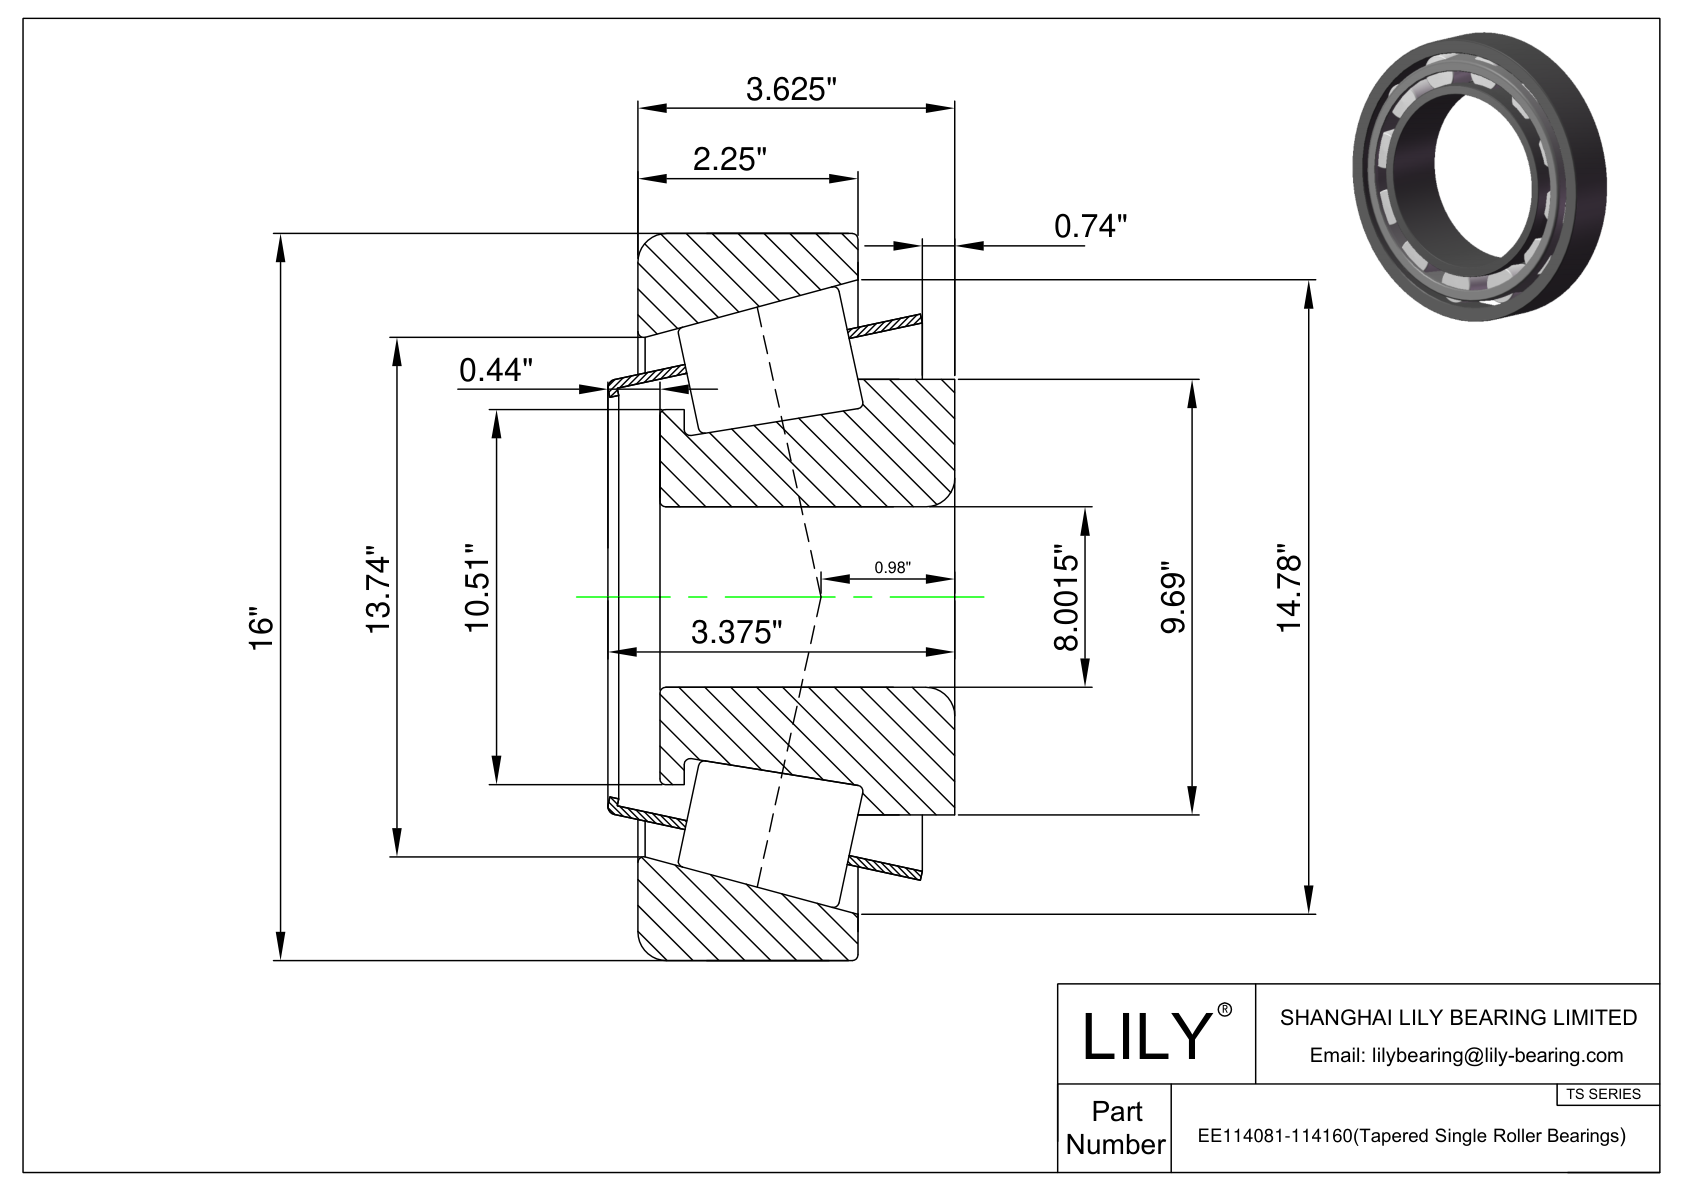 EE114081-114160 TS (Tapered Single Roller Bearings) (Imperial) cad drawing